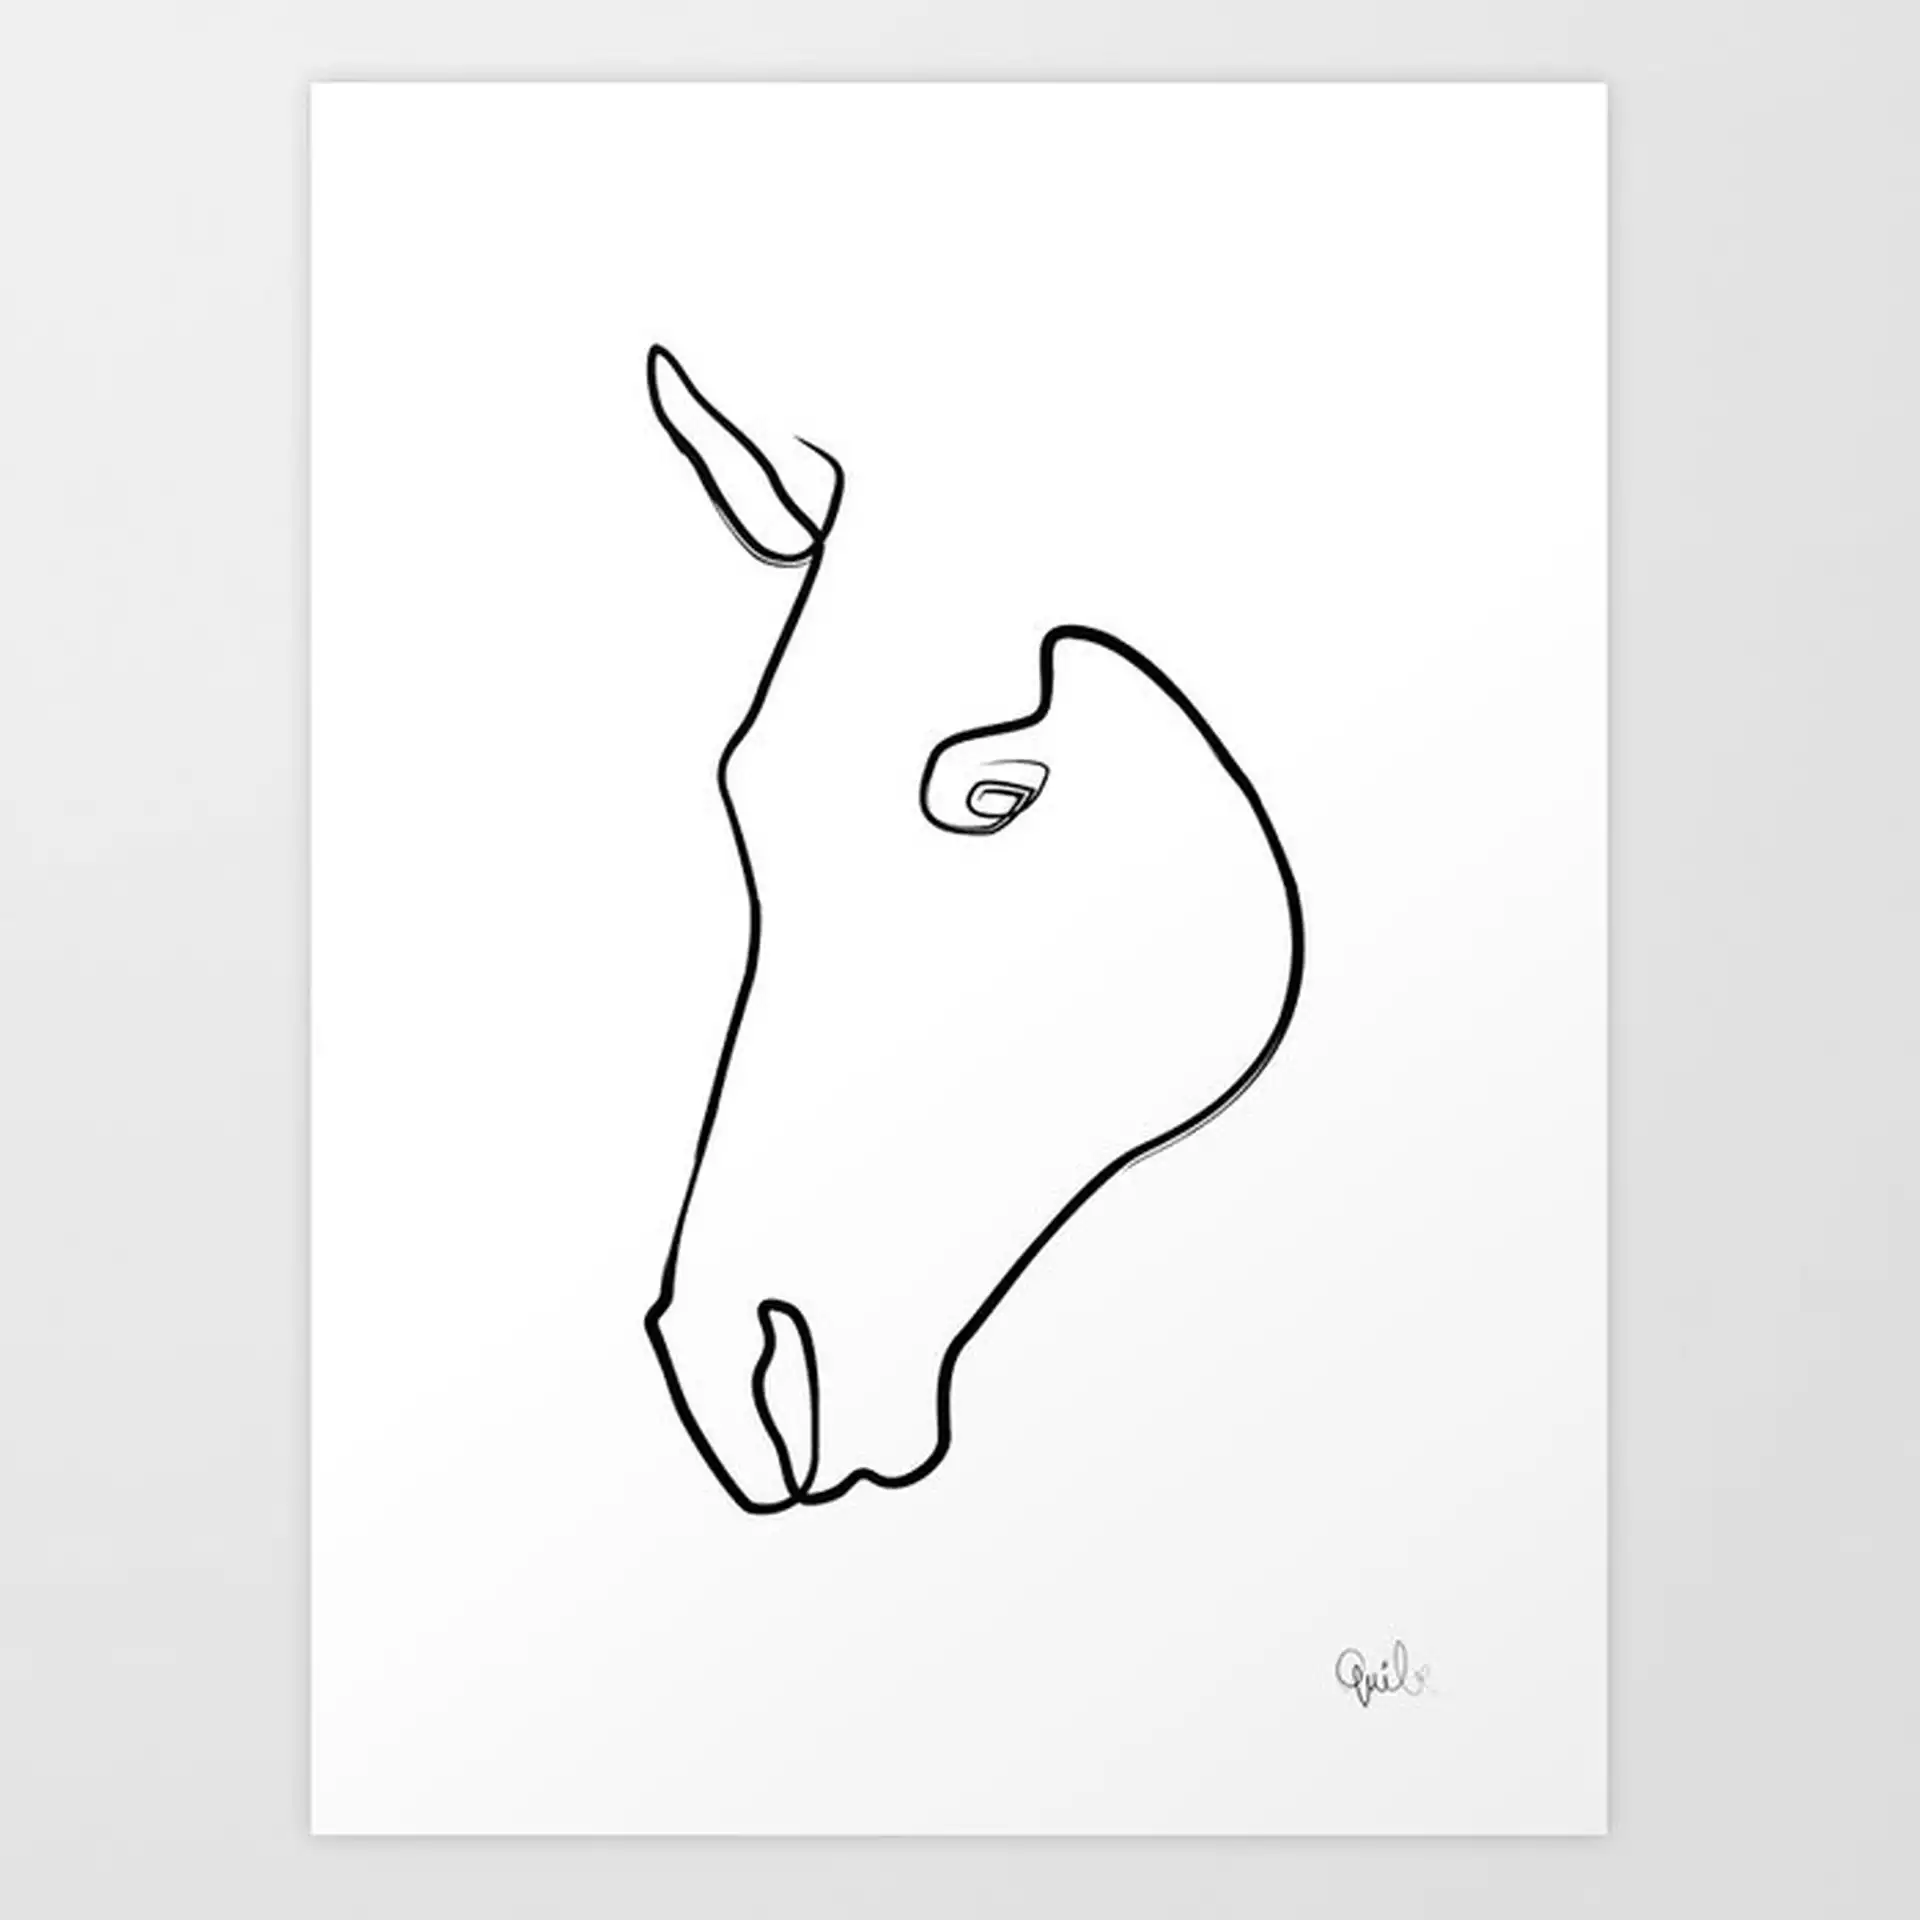 Horse 2204 Art Print by Quibe - SMALL